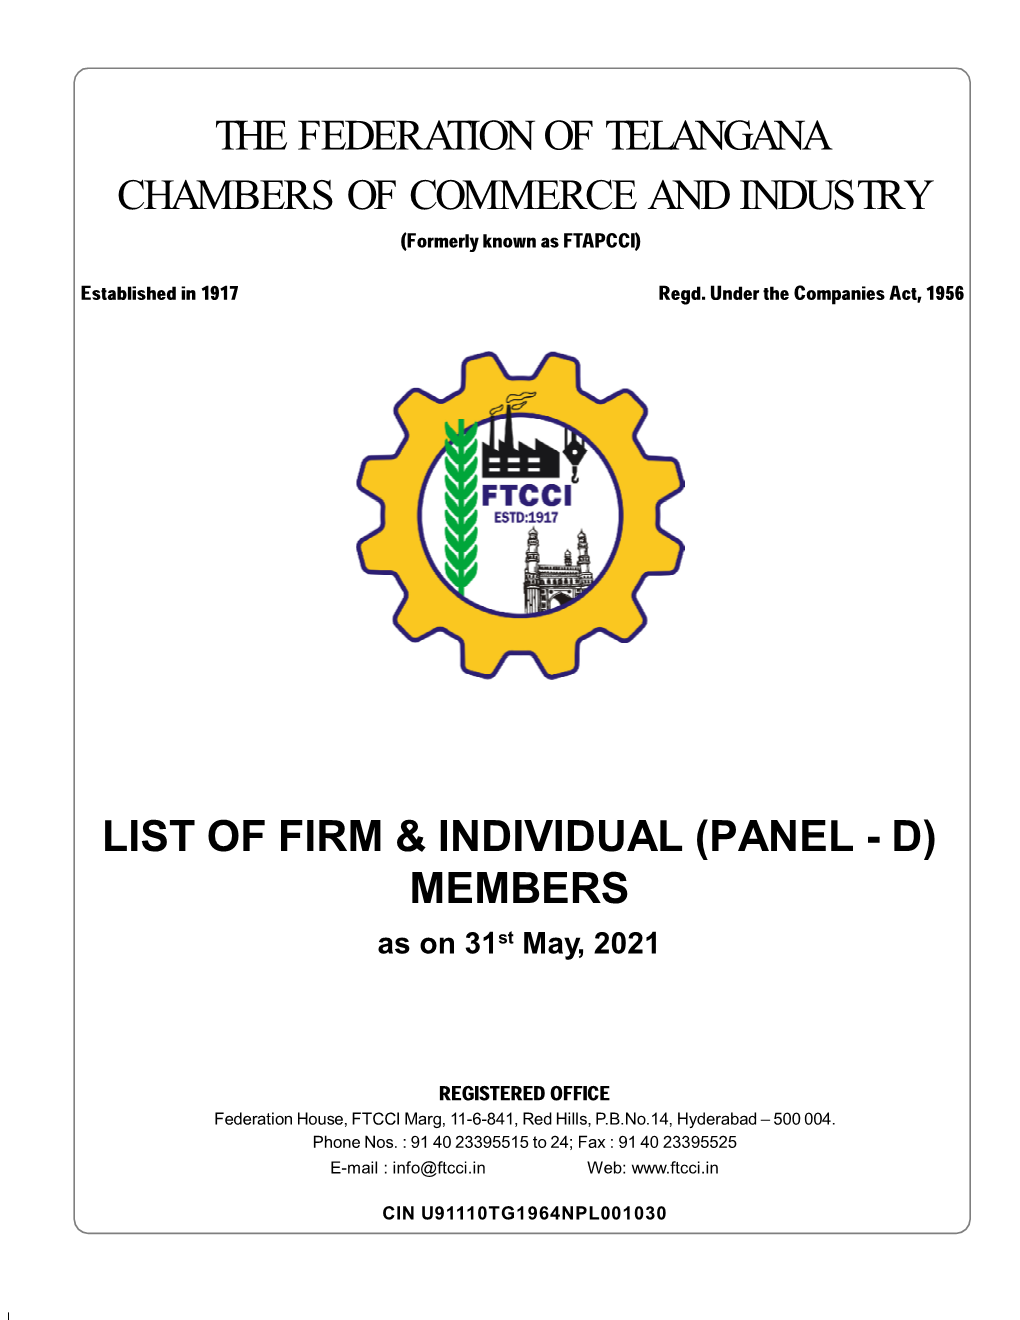 PANEL - D) MEMBERS As on 31St May, 2021